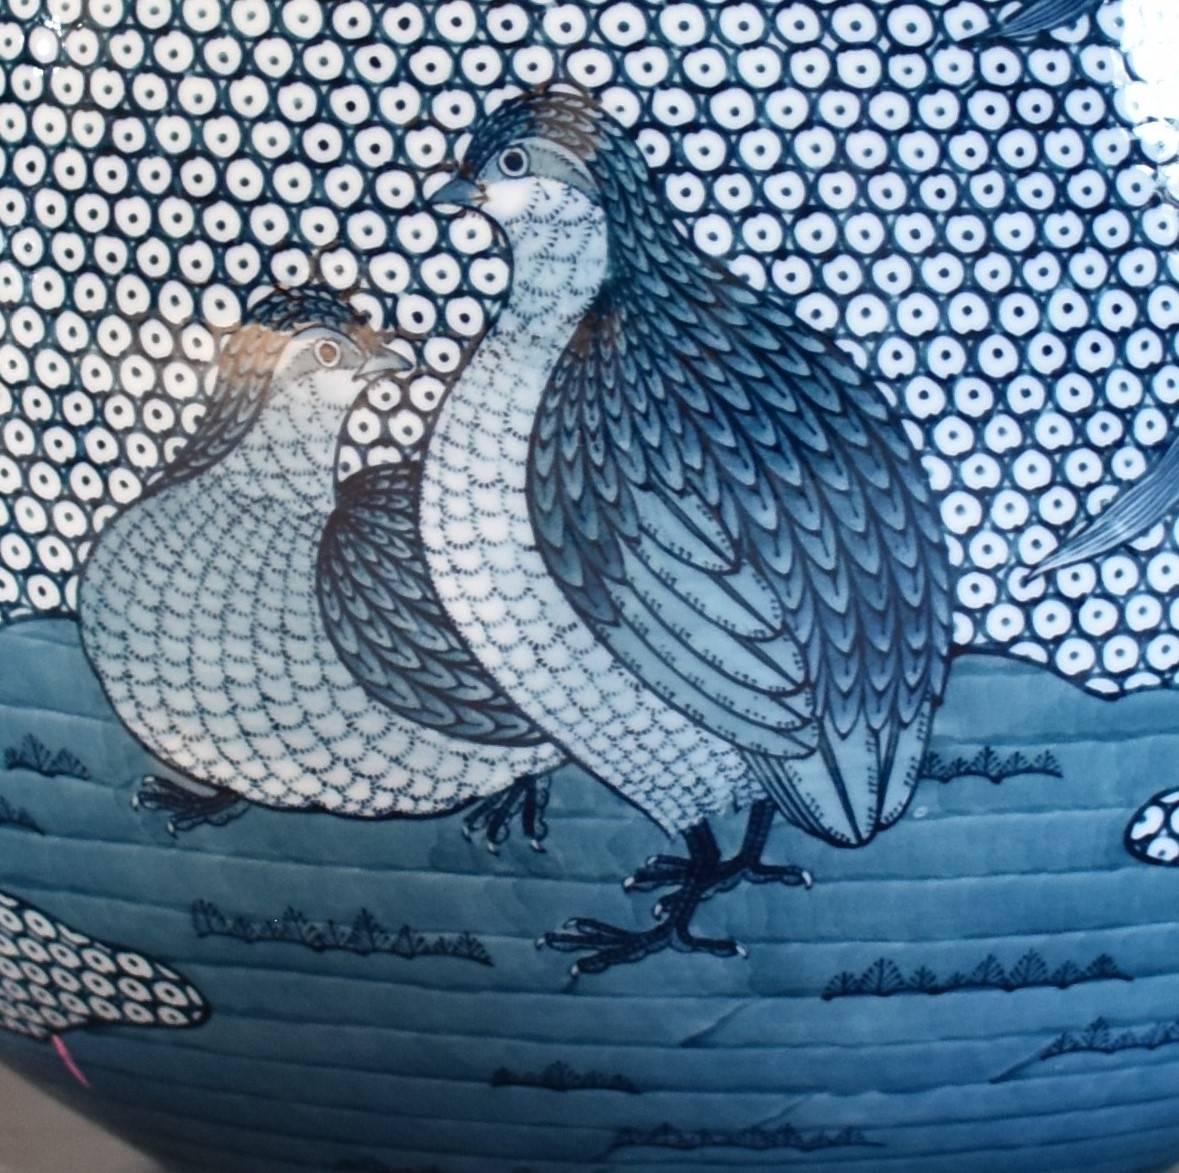 Extraordinary contemporary decorative porcelain vase in blue underglaze on a beautifully shaped body, extremely intricately hand-painted, a stunning masterpiece by highly acclaimed award-winning master porcelain artist of the Imari-Arita region of